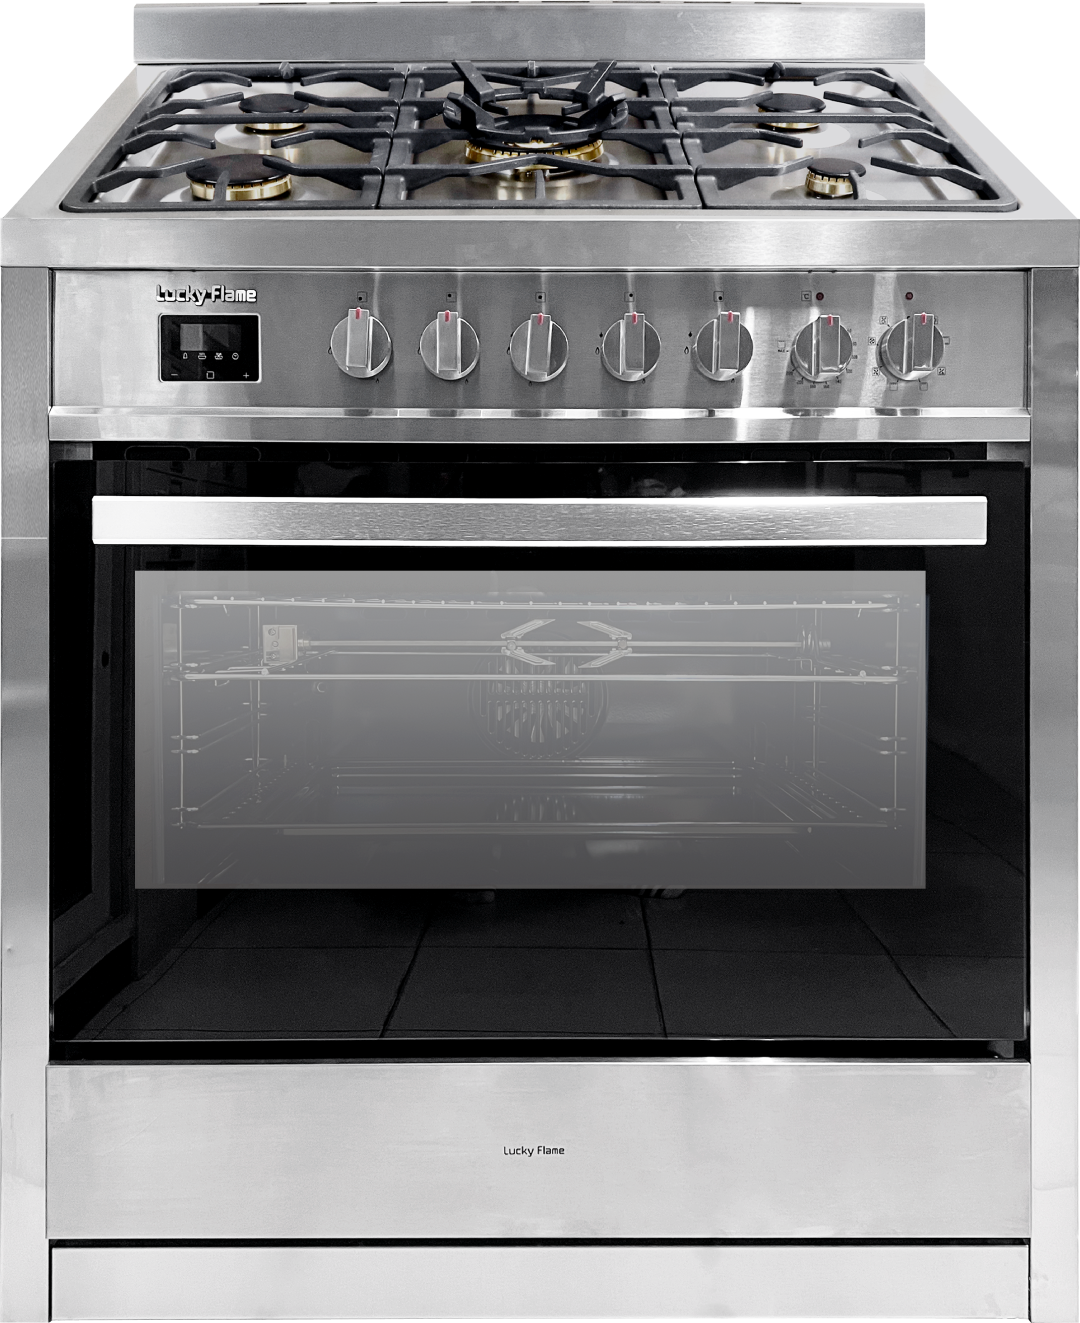 90cm Freestanding electric oven with gas cooktops